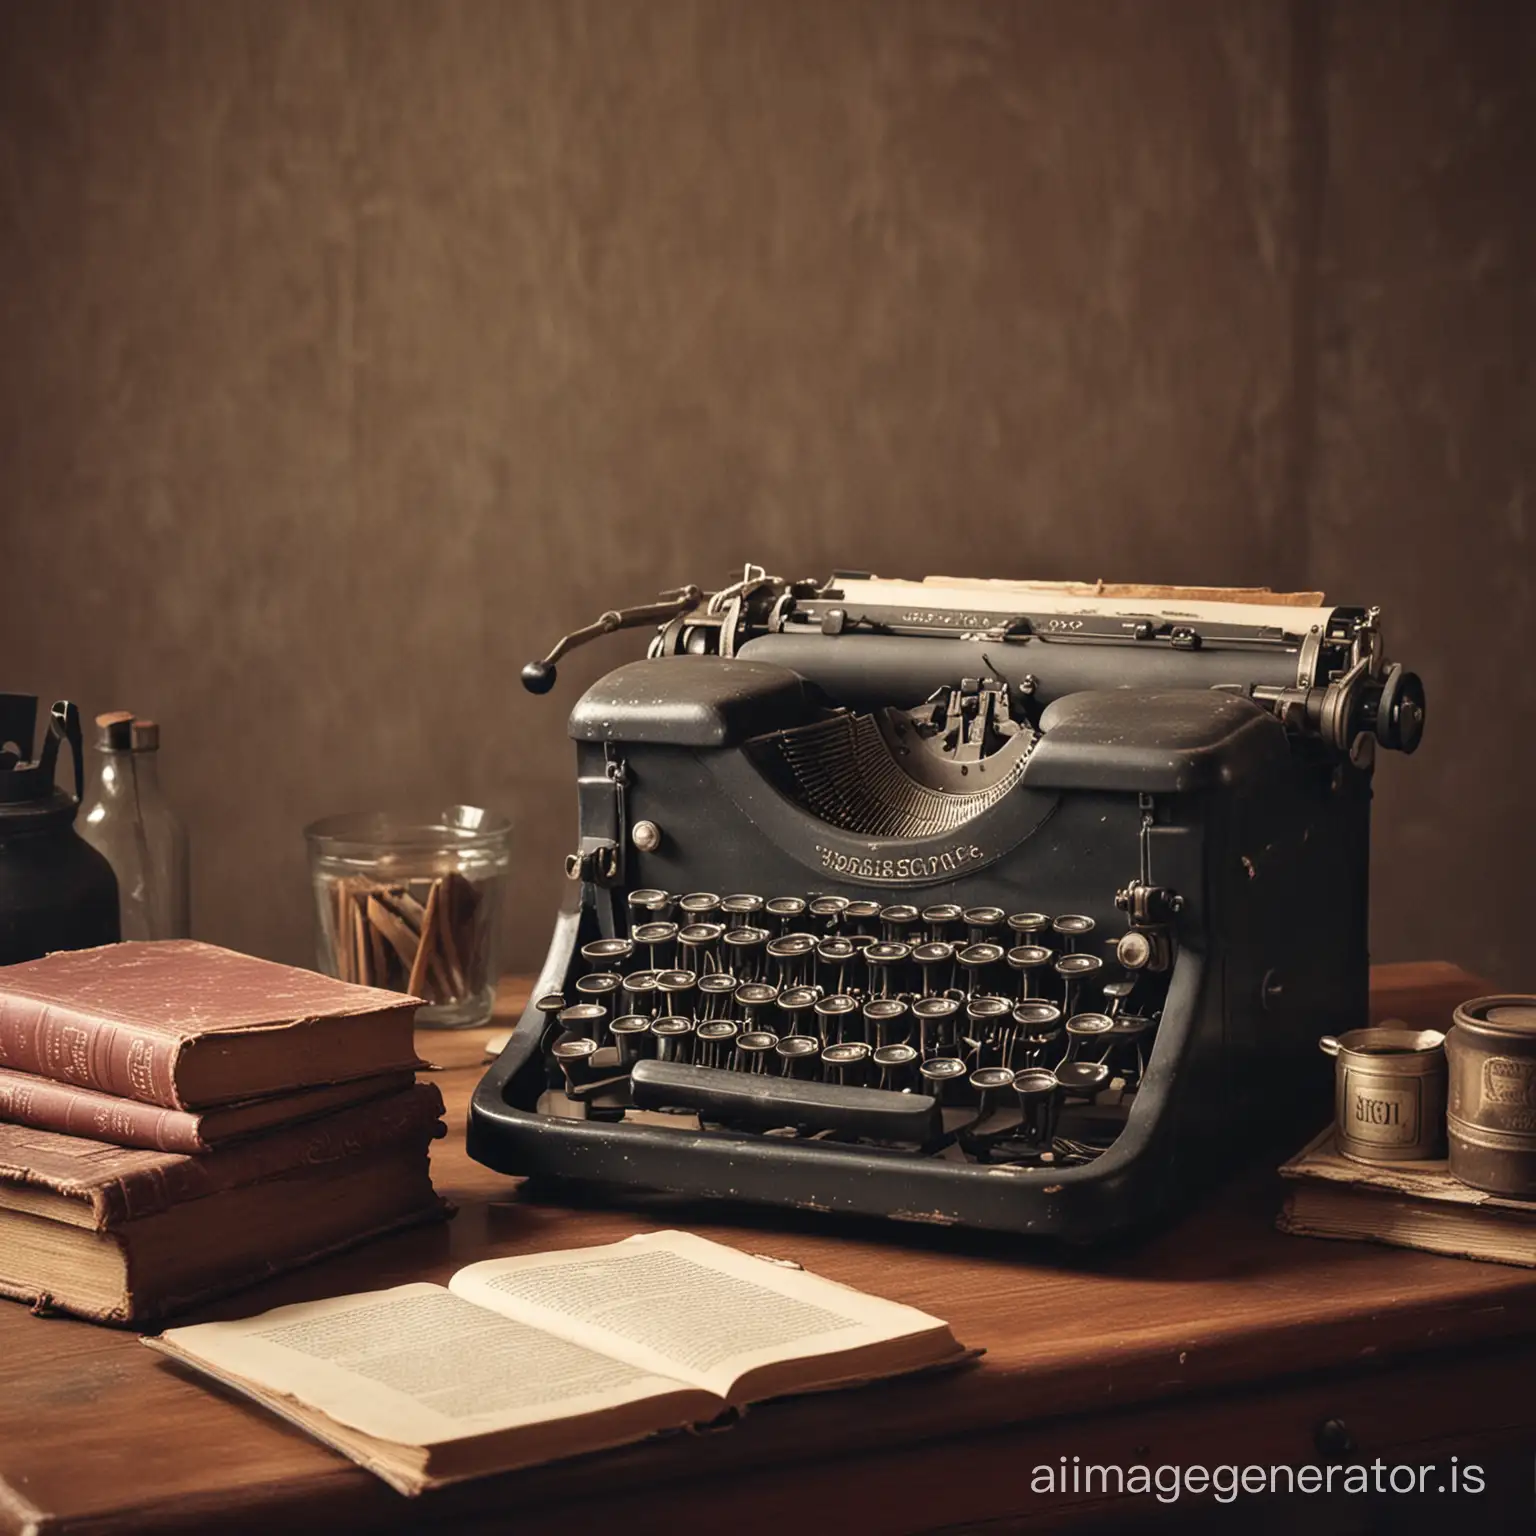 Vintage-Writers-Workshop-with-Antique-Typewriter-and-Old-Books